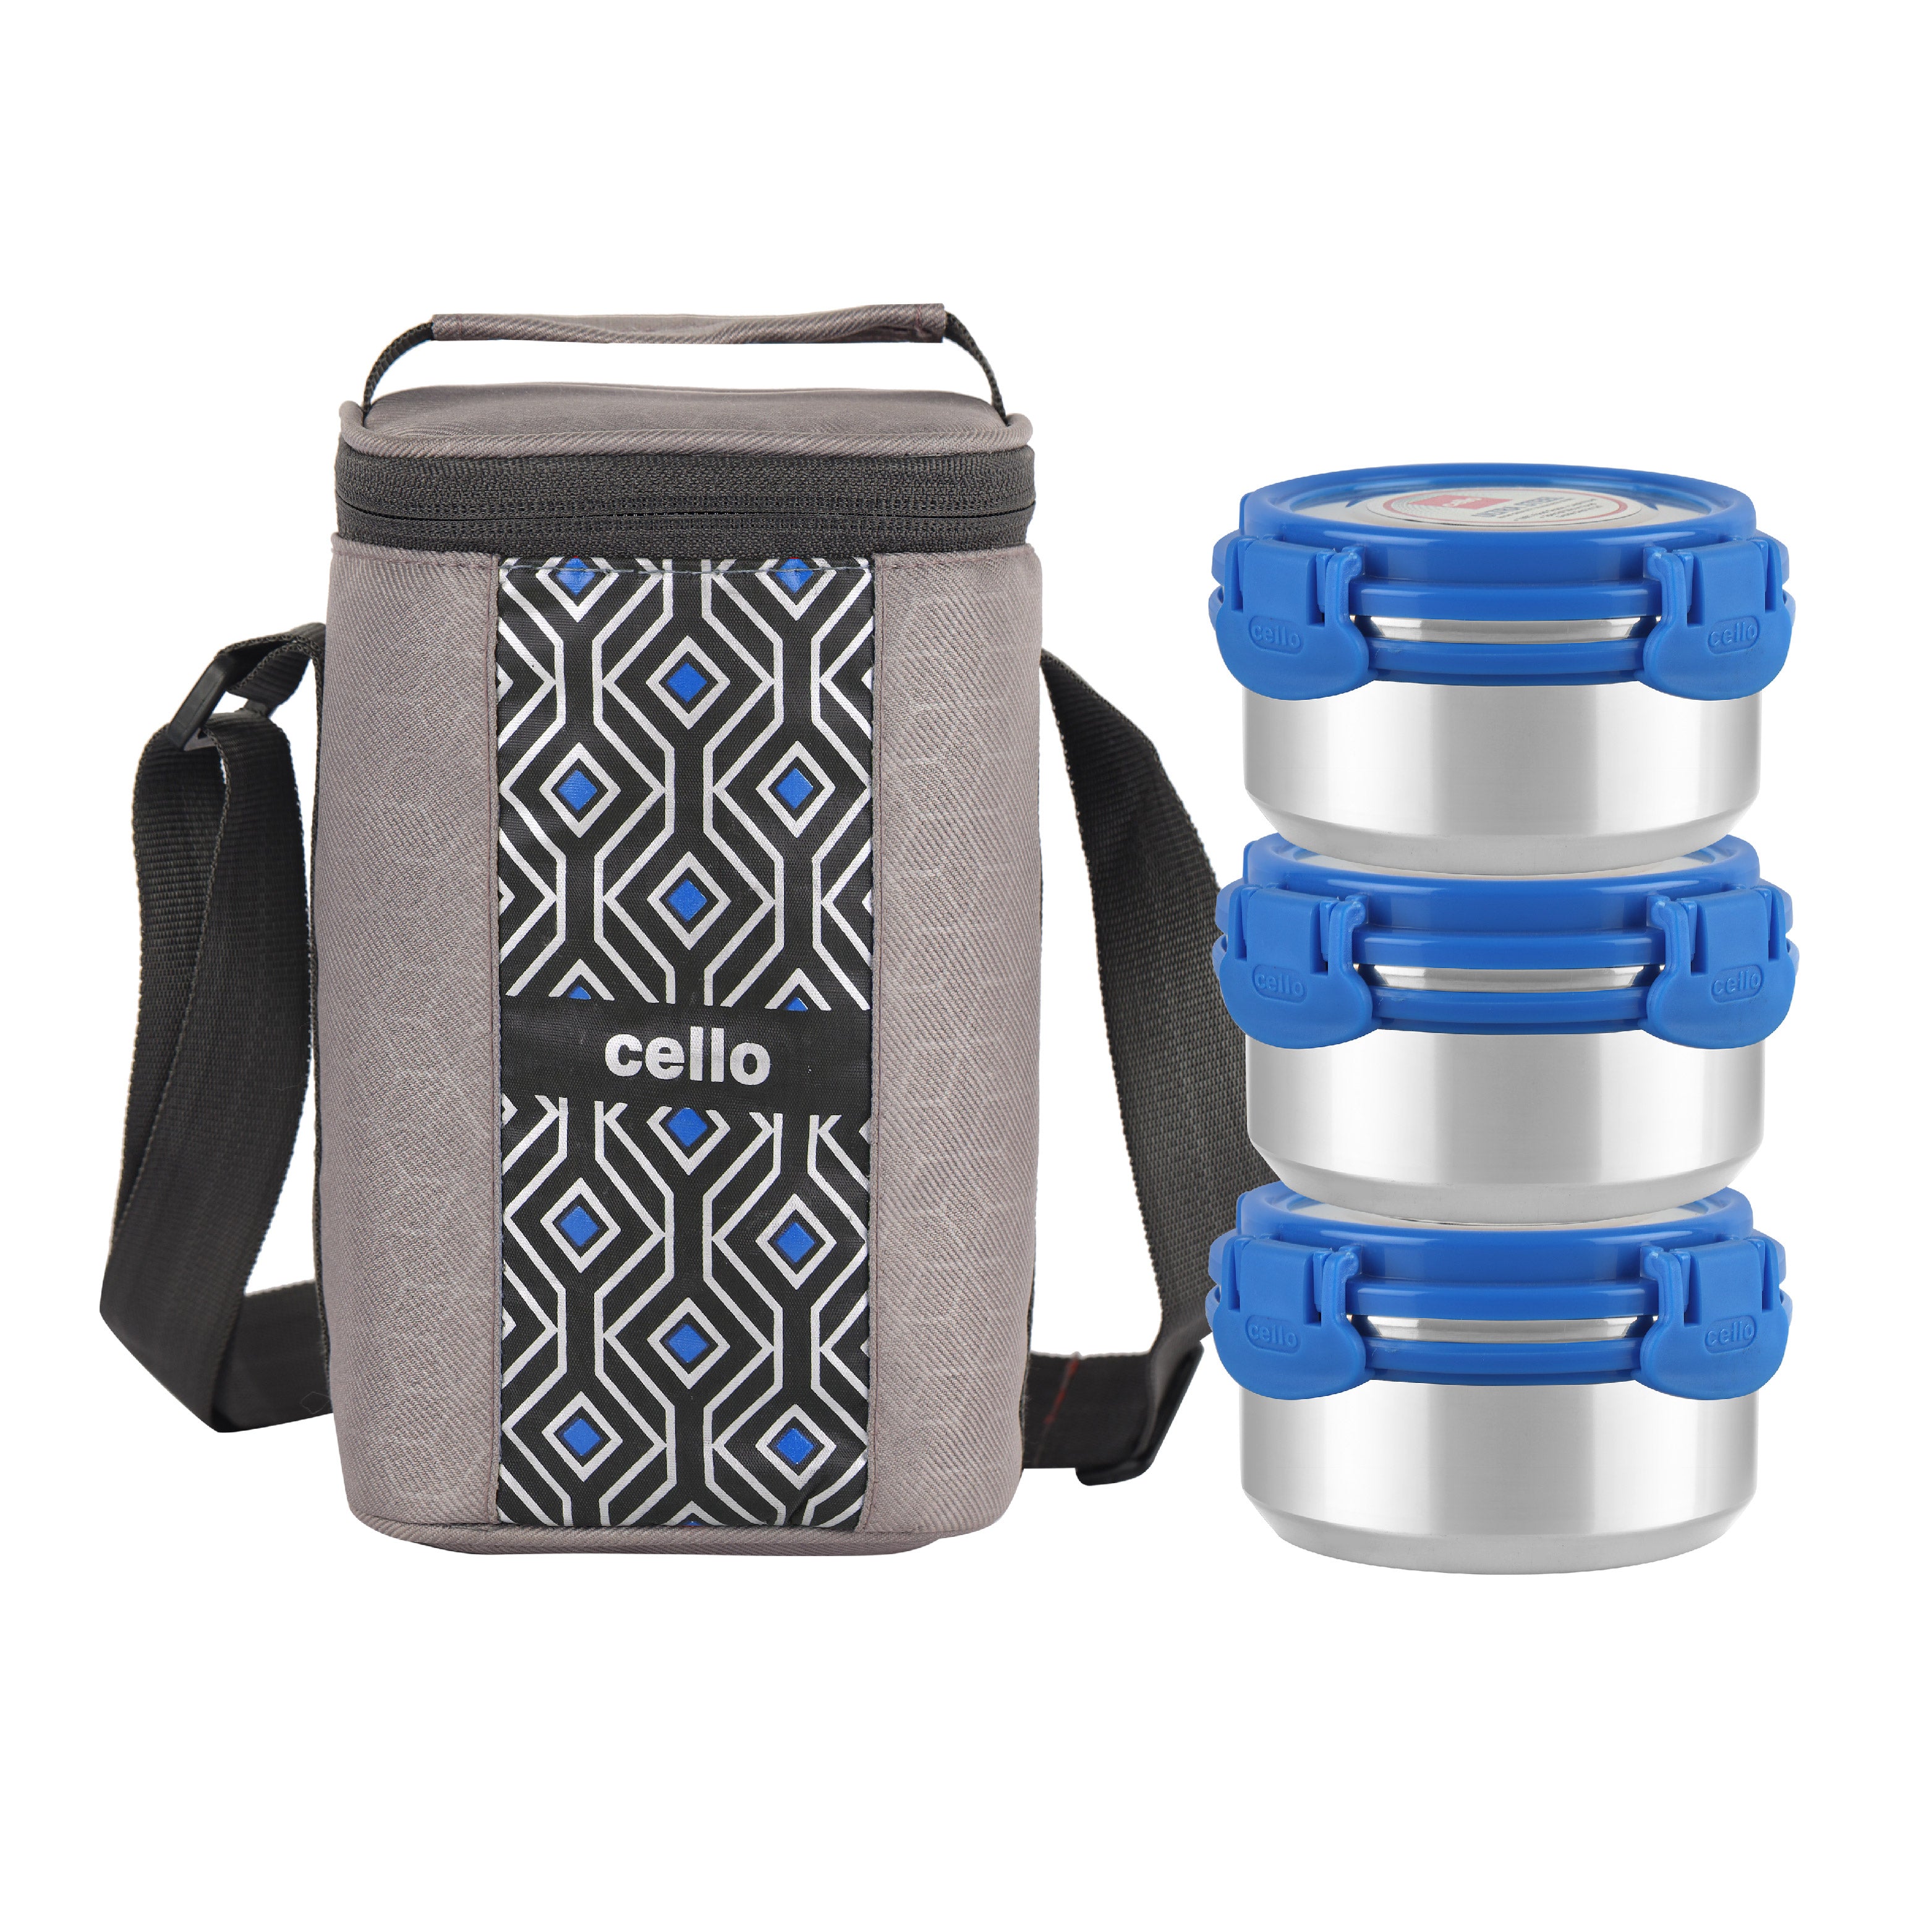 Max Fresh Ultra Stainless Steel Lunch Box with Jacket, Set of 3 Blue / 3 Piece